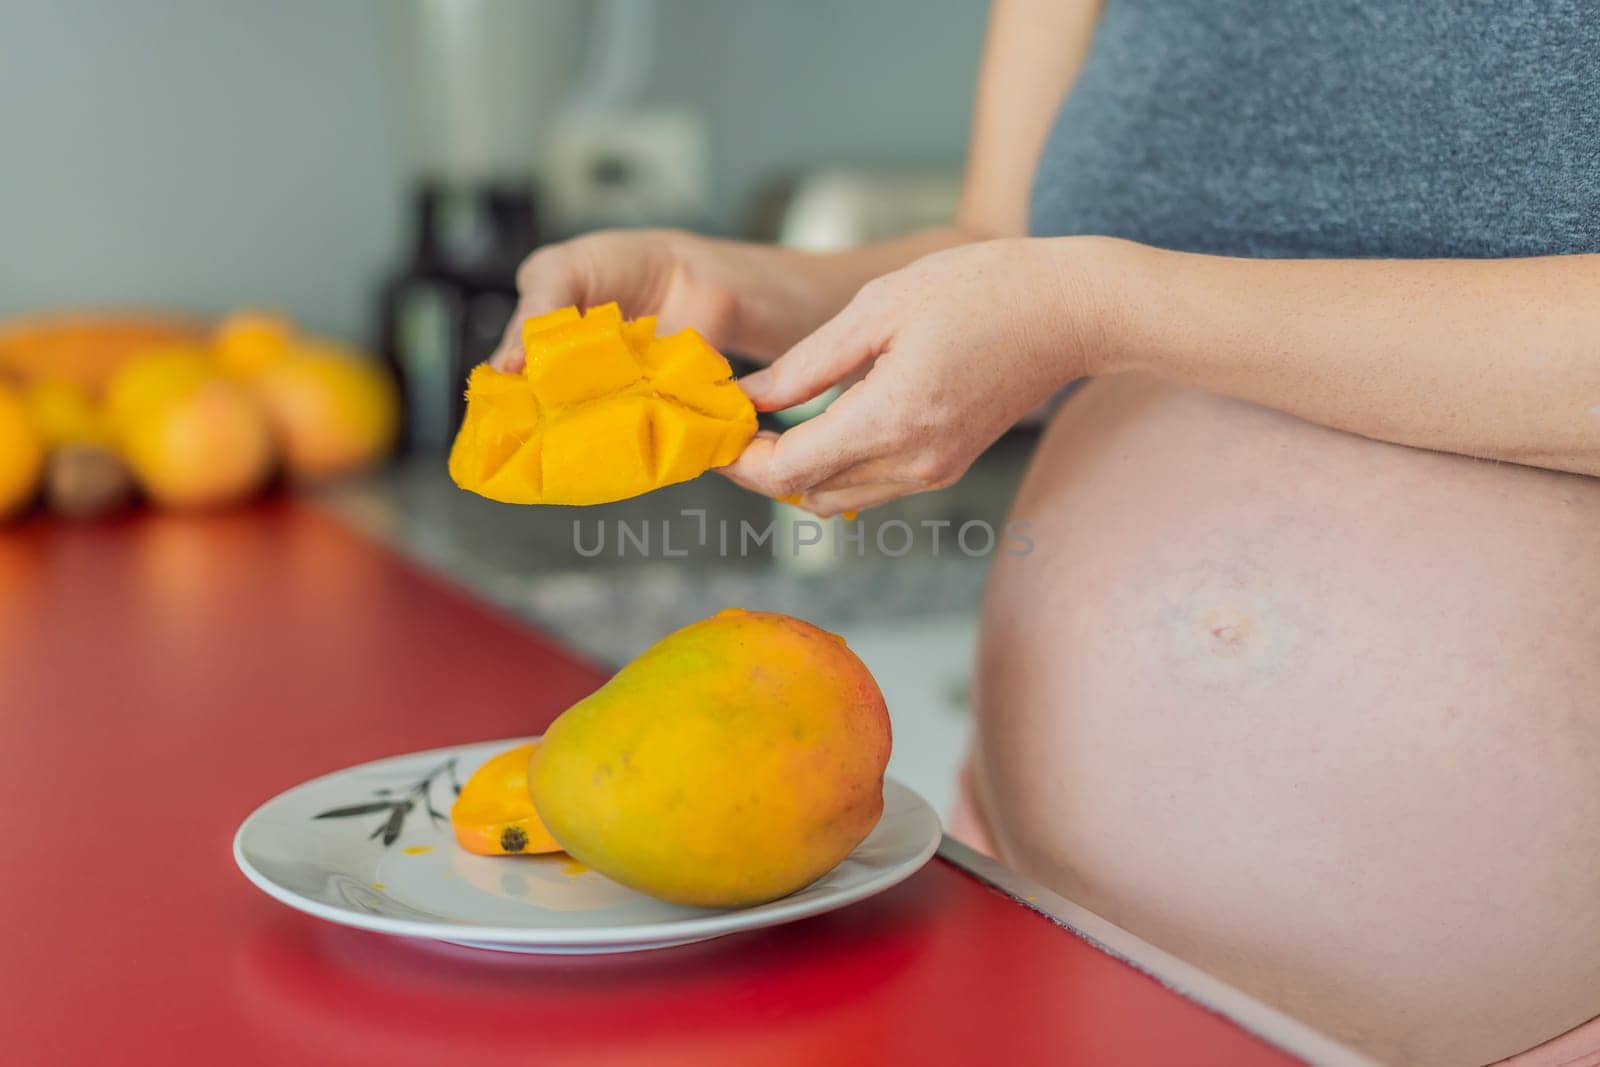 A skillful pregnant woman delicately cuts into a ripe mango, savoring a moment of culinary joy and nourishing her pregnancy with a fresh and flavorful treat by galitskaya